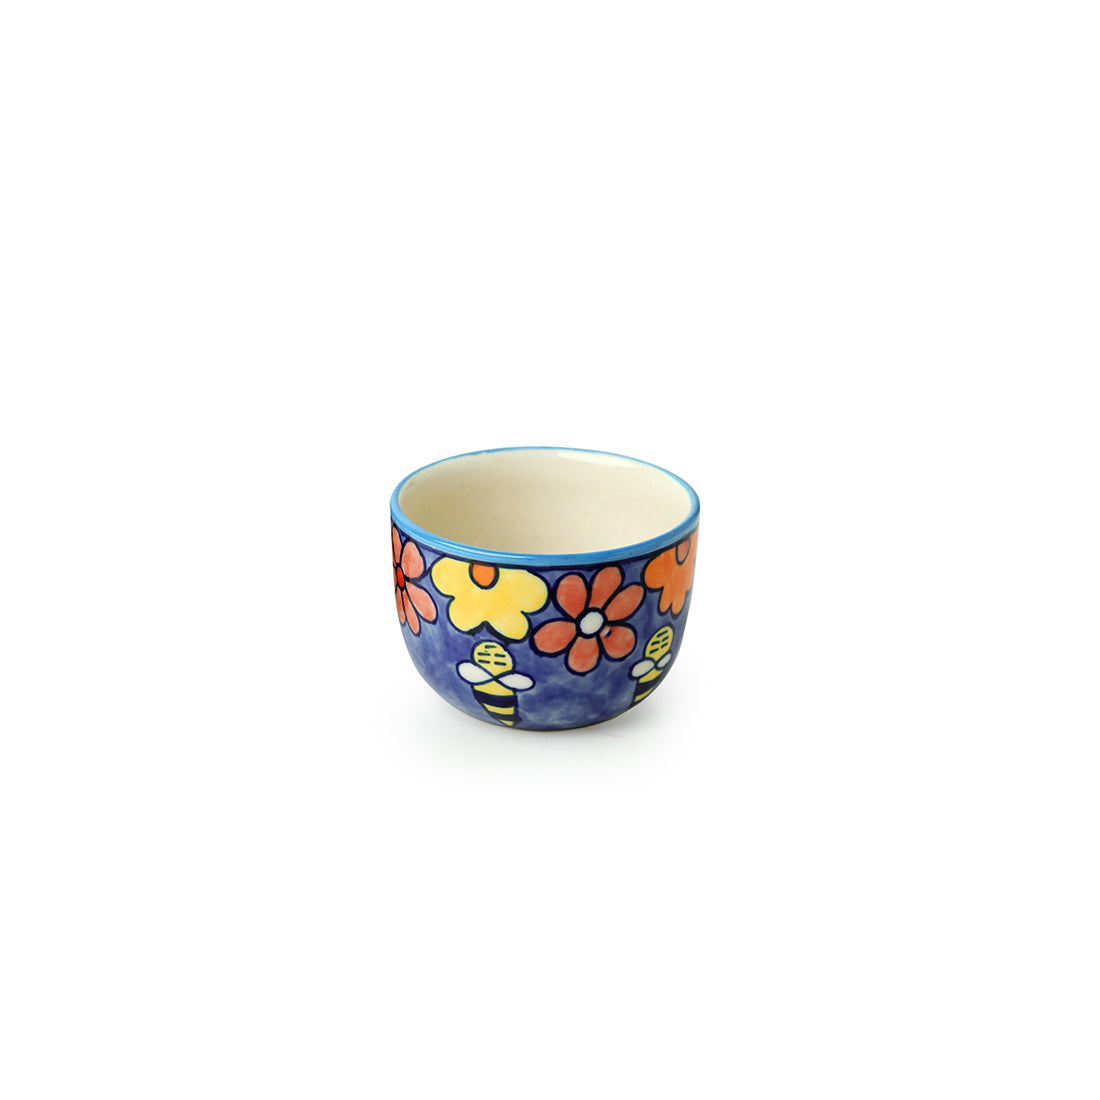 'The Bee Collective' Handpainted Ceramic Serving Bowls (Set Of 2, 250 ML, Microwave Safe)